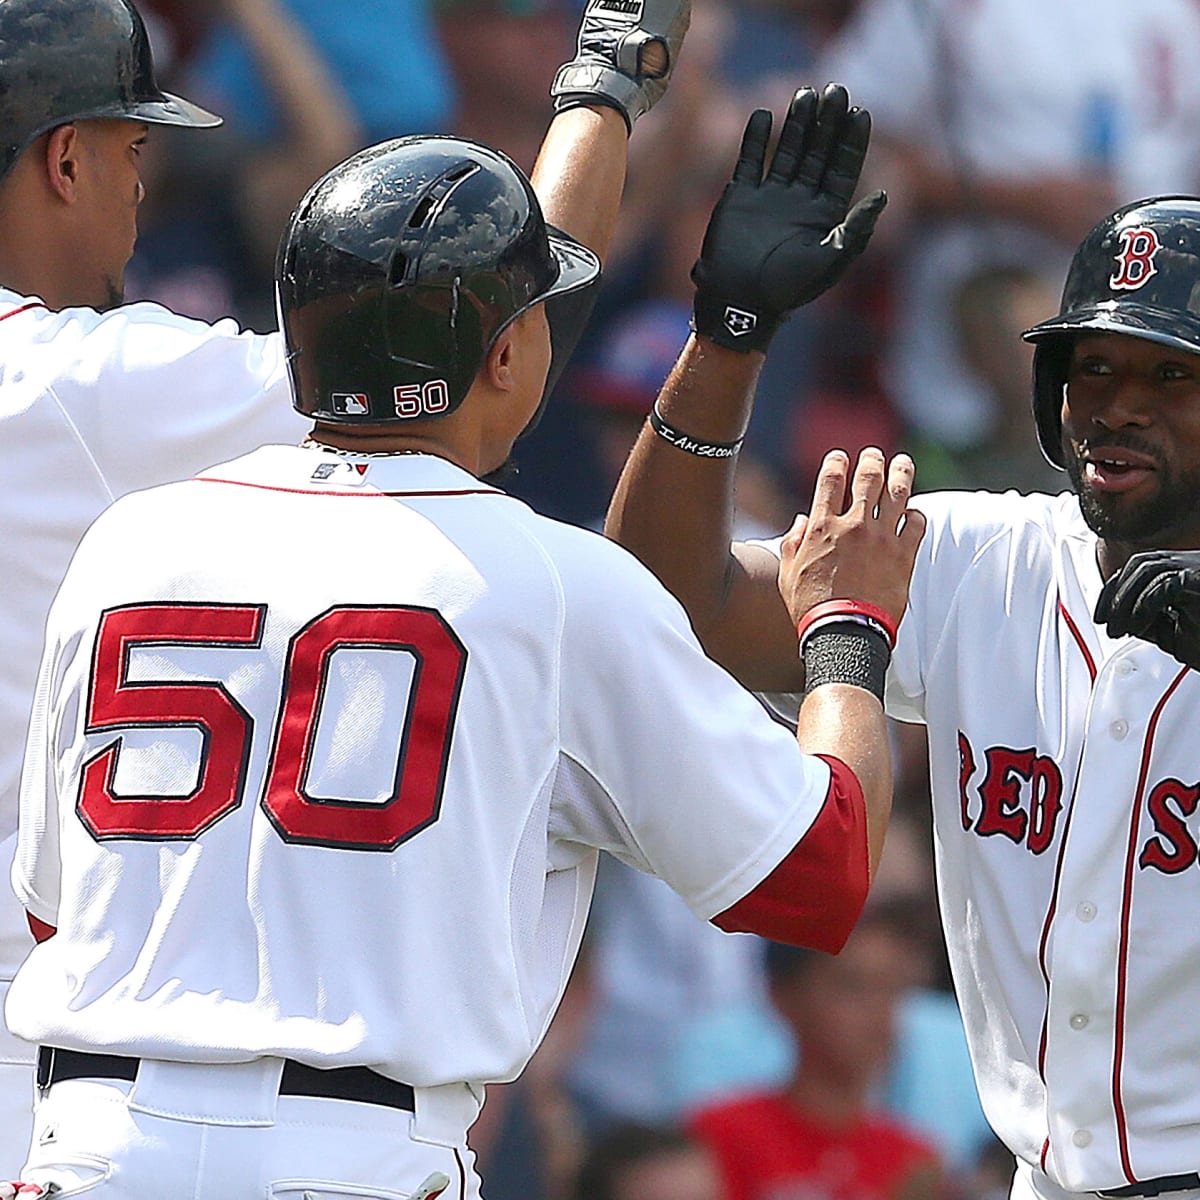 Gamecocks' legend Jackie Bradley Jr. saves Red Sox with home run